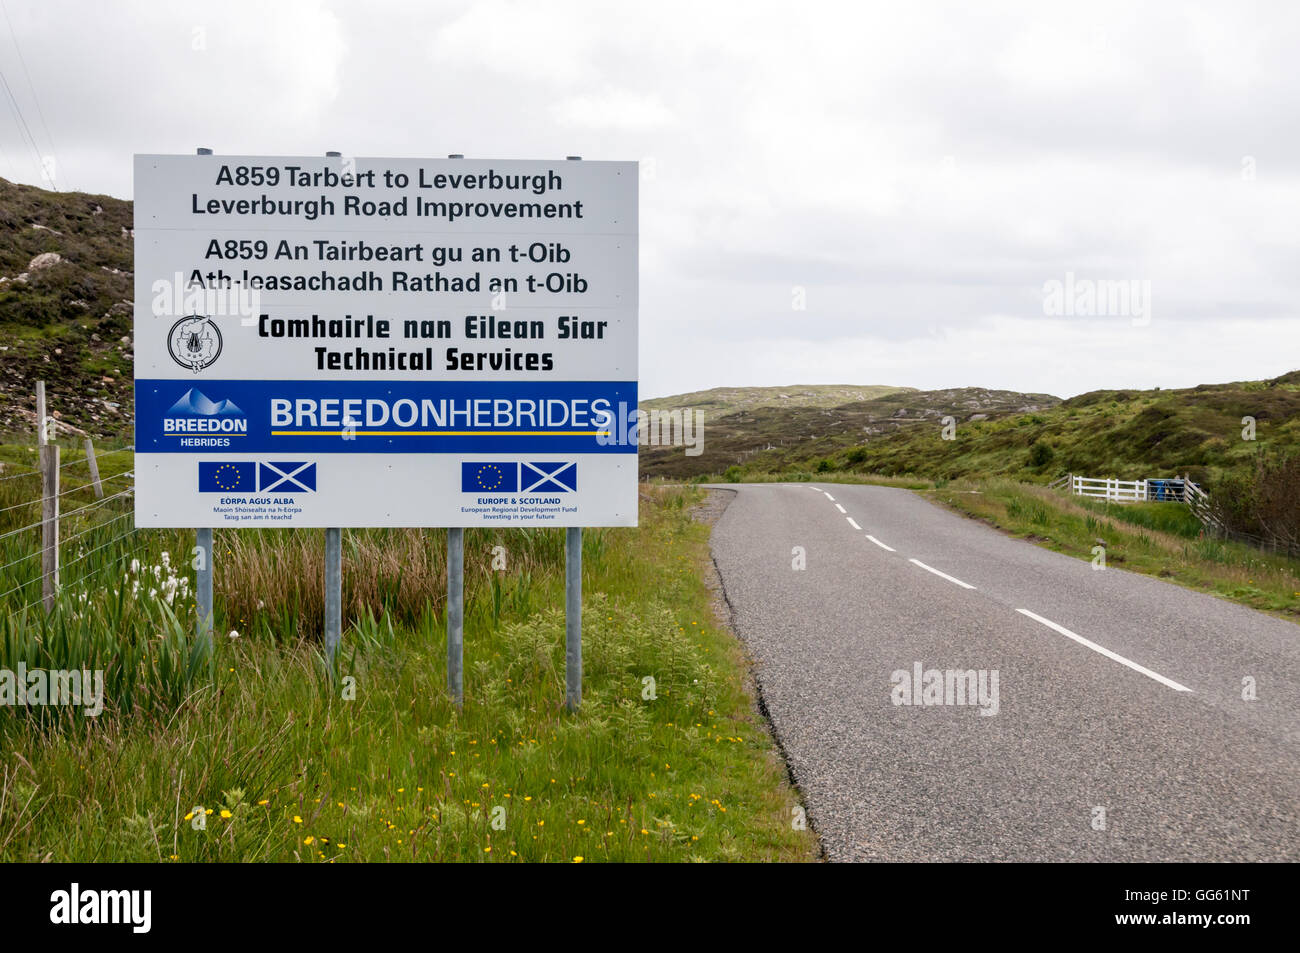 European logo or EU insignia and sign for European Regional Development Fund on improvements to the A859 Tarbert to Leverburgh road on Harris. Stock Photo